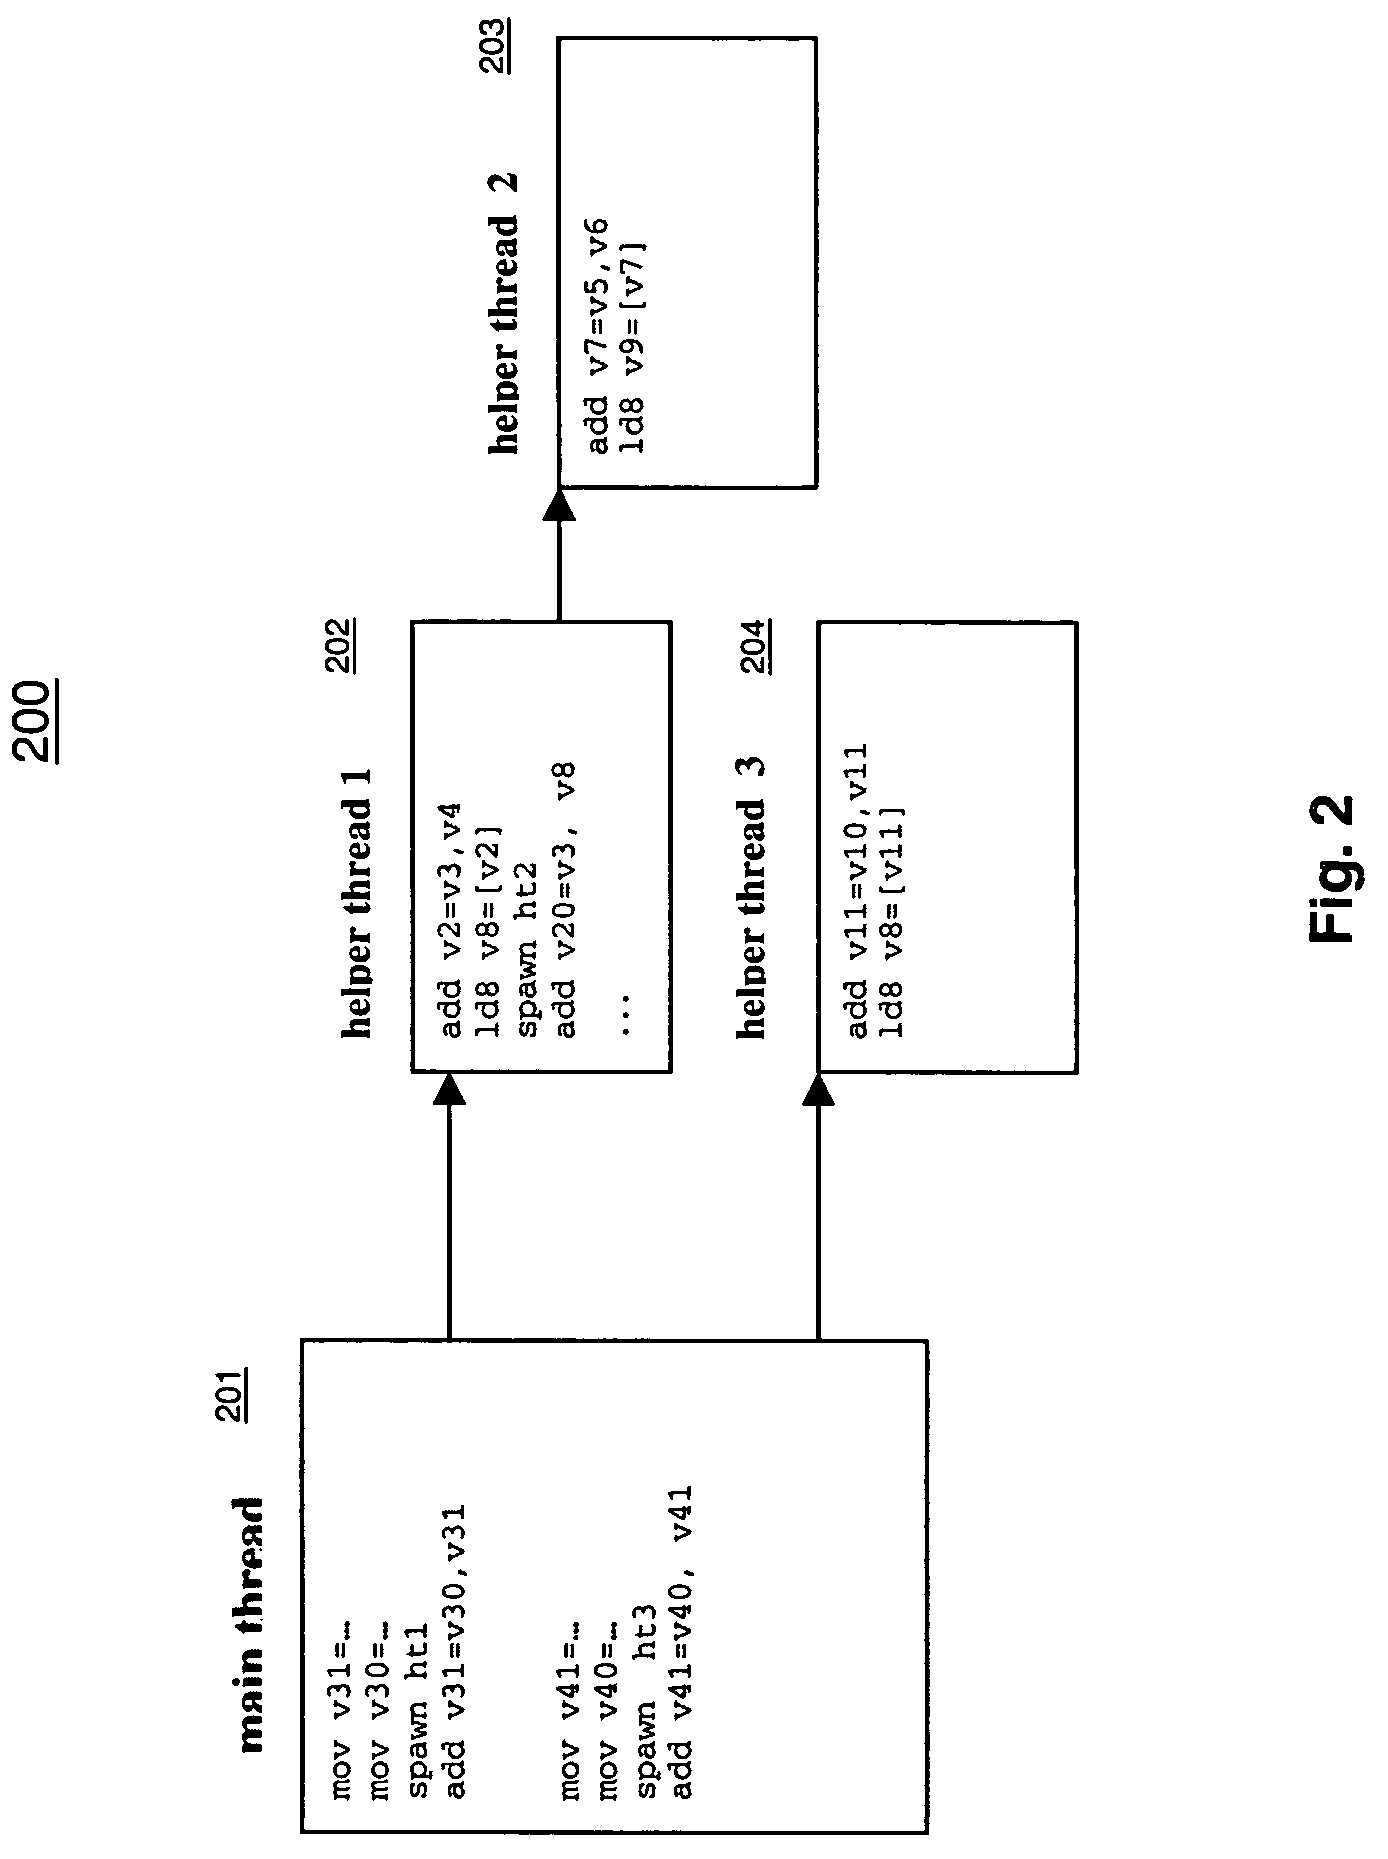 Methods and apparatuses for thread management of multi-threading